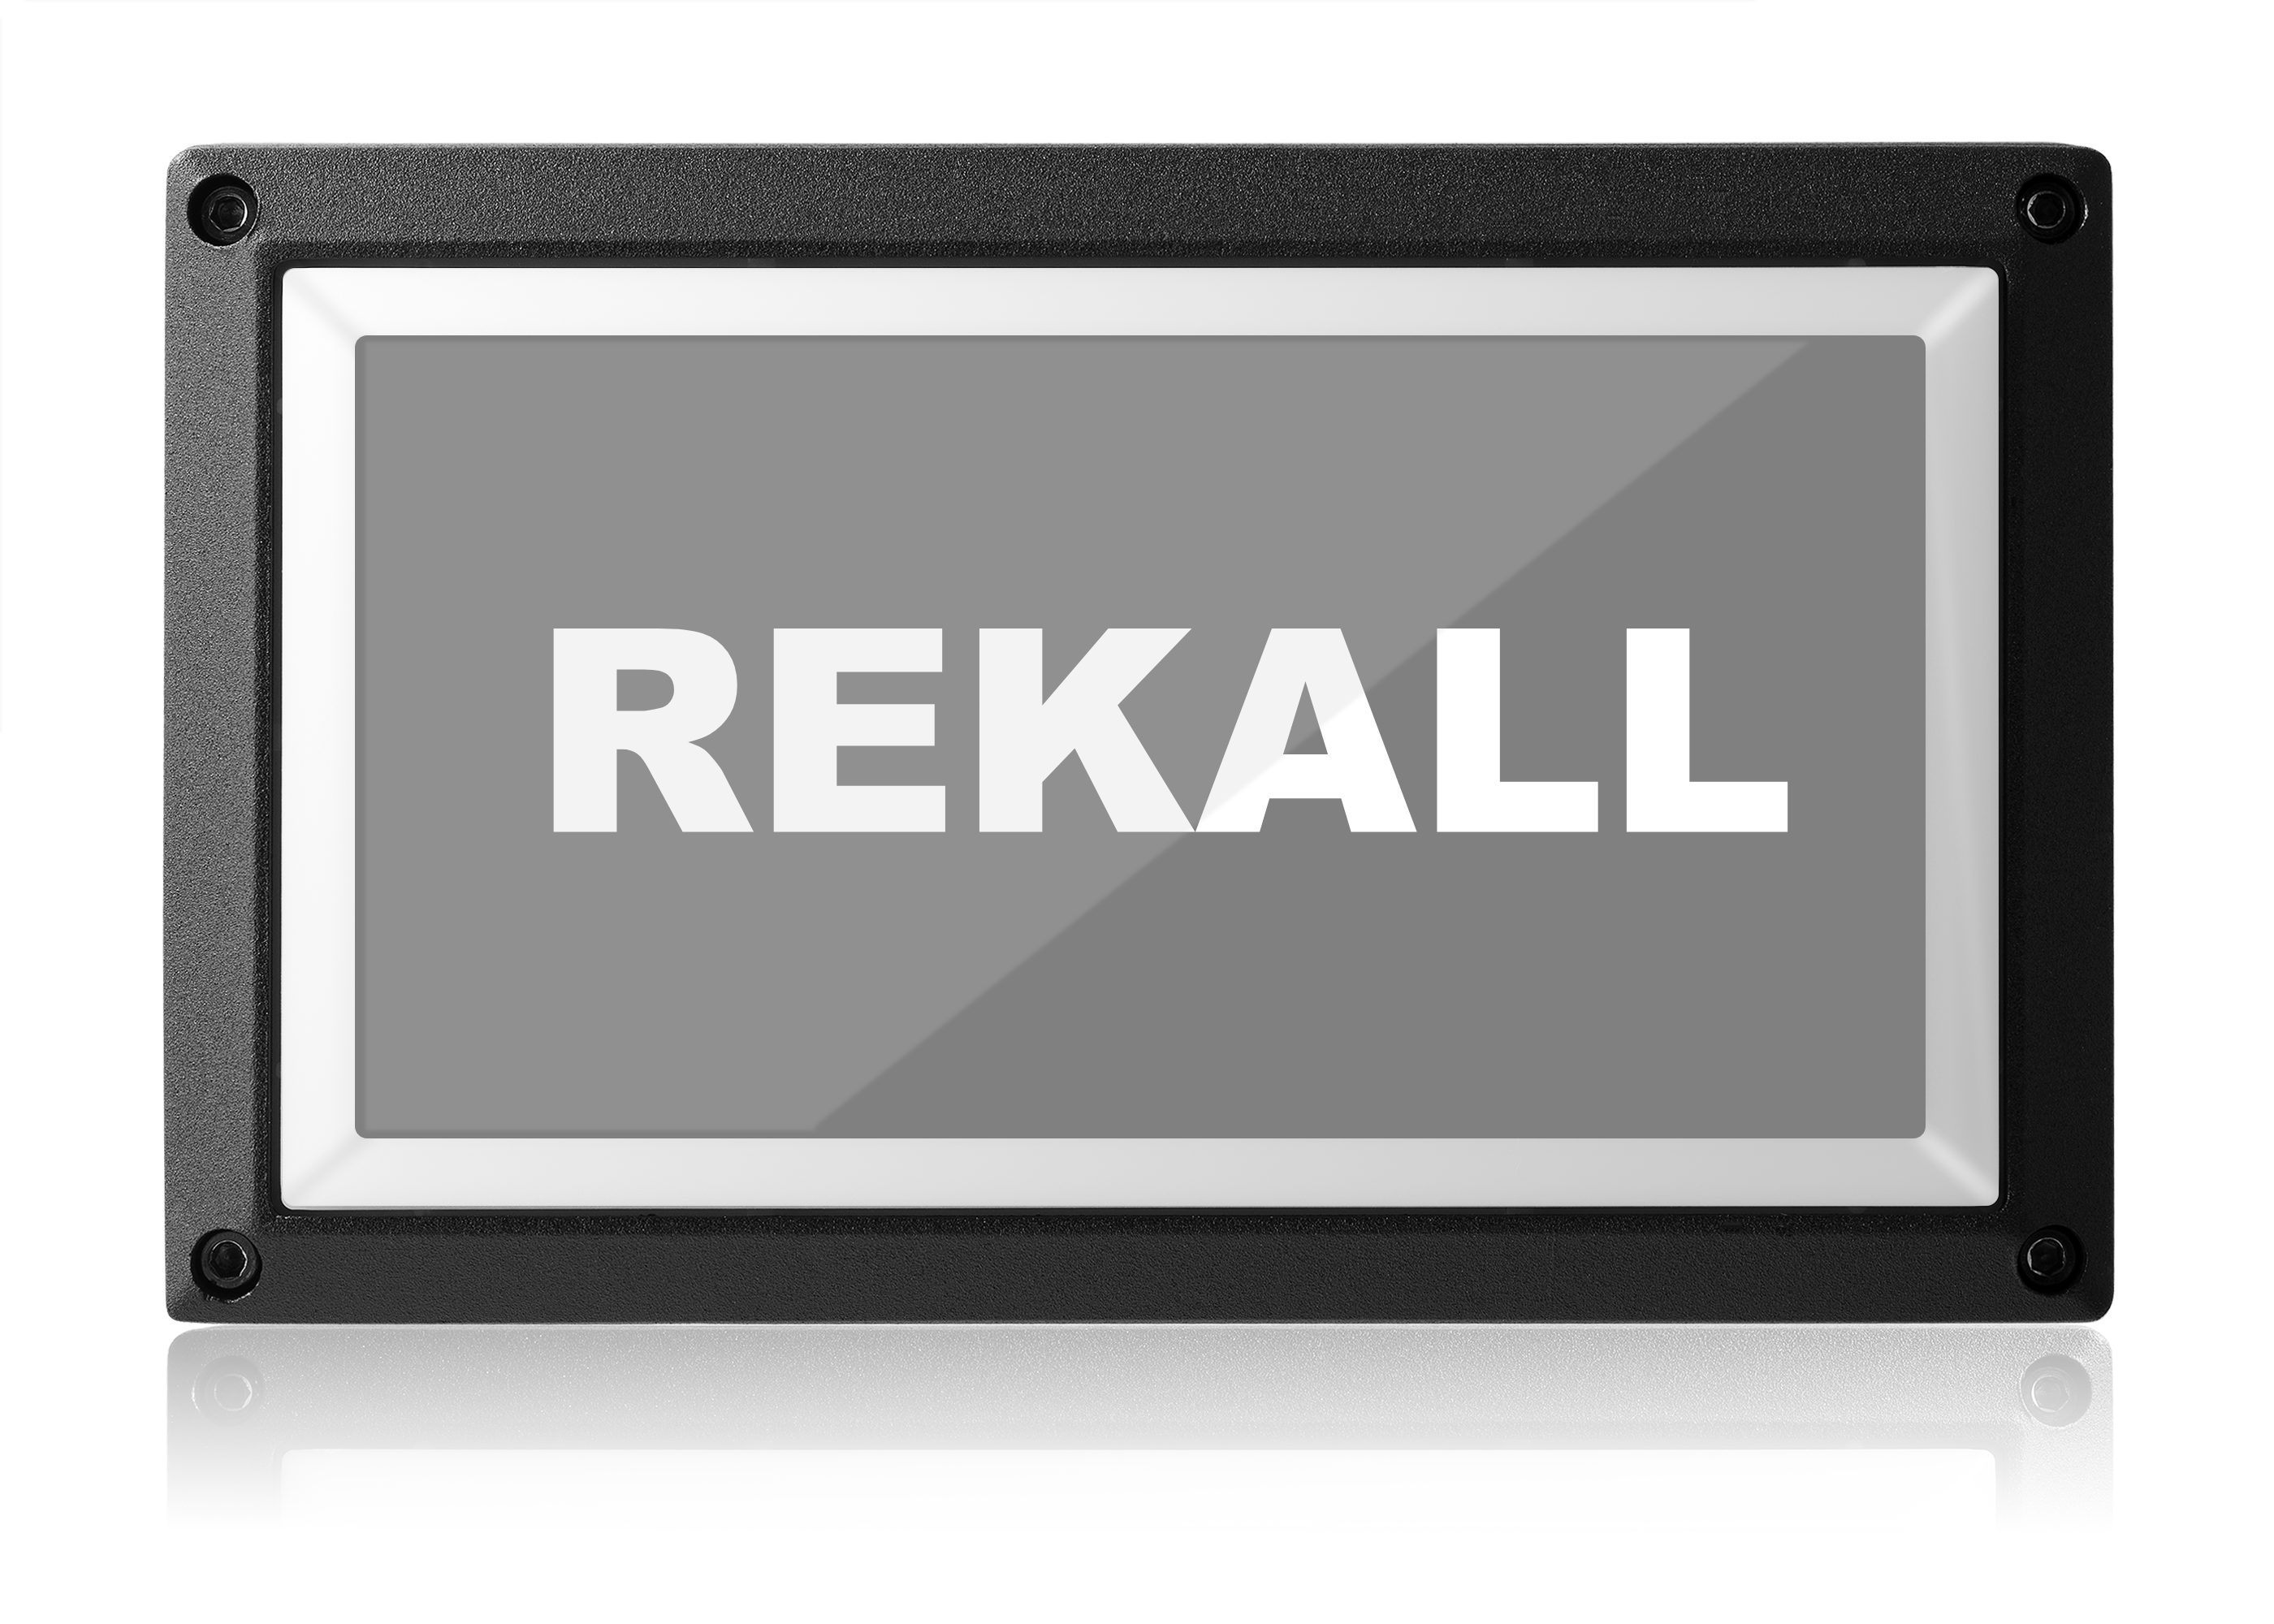 X-Ray In Use Light - Red ISO - Rekall Dynamics LED Warning Sign-Green-Low Voltage (12-24v DC)-